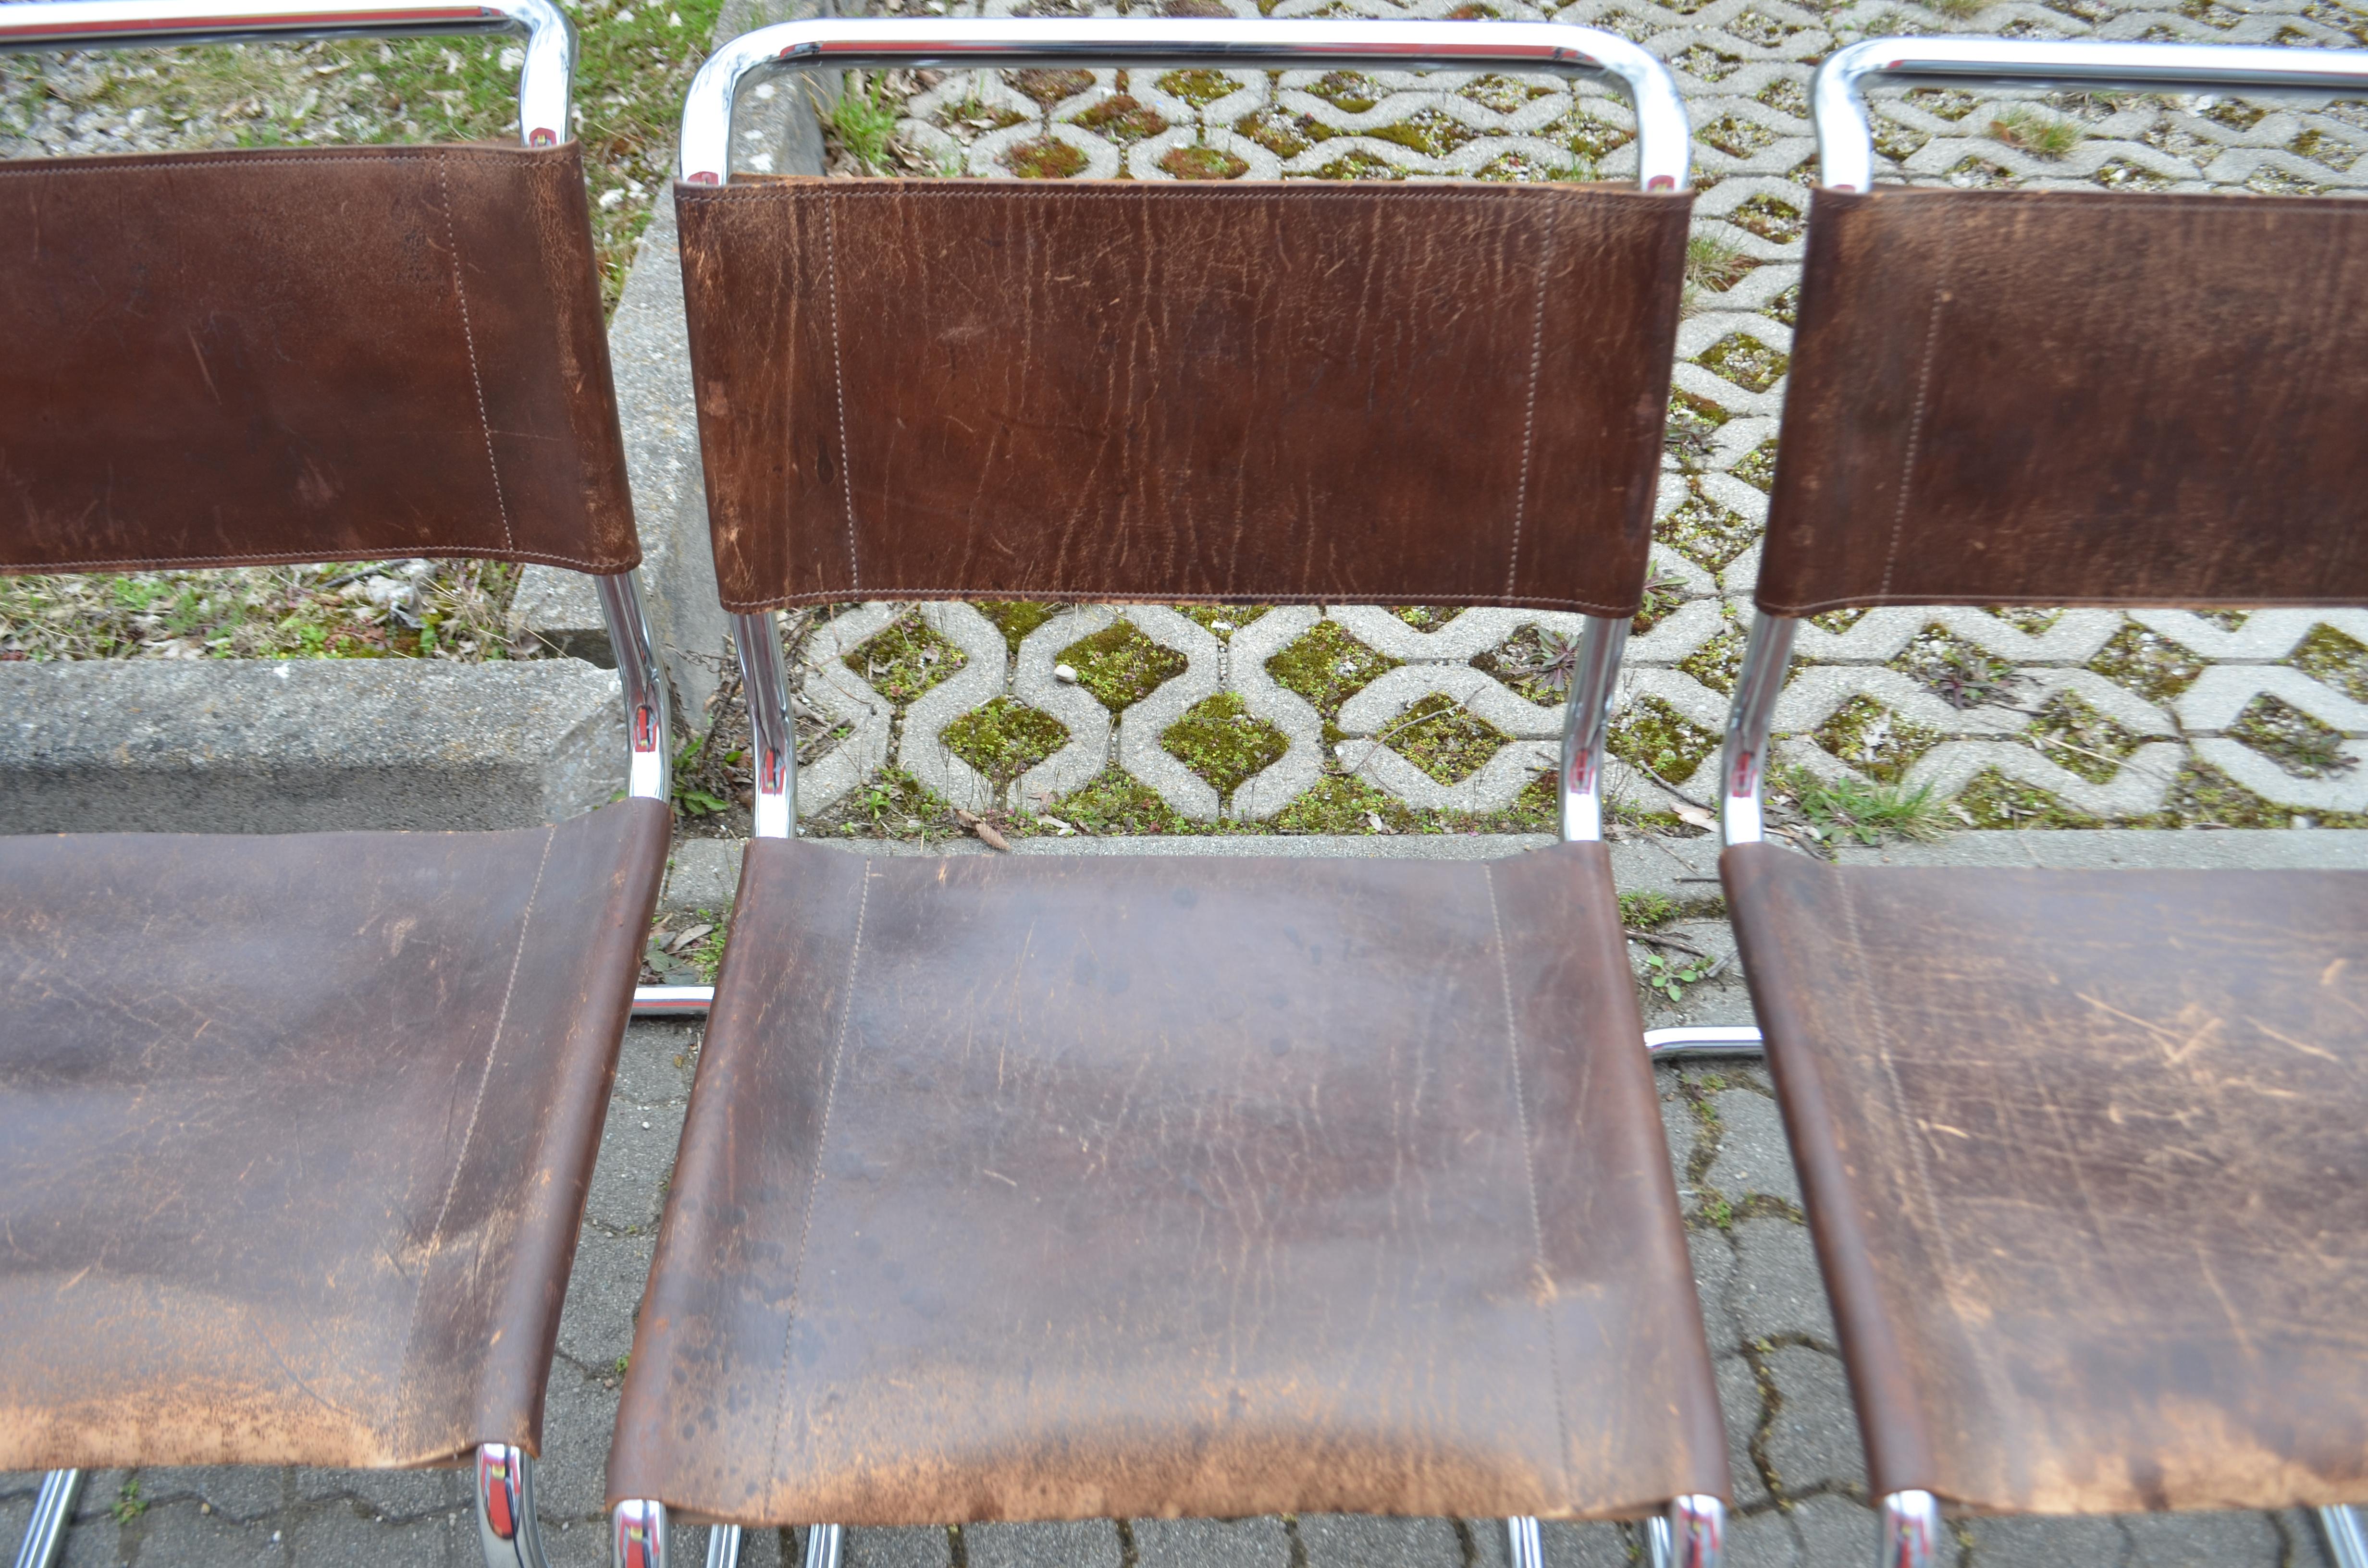 Vegetable Dyed Thonet S 33 Vintage Brown Leather Chairs Mart Stam Cantilever Set of 10 For Sale